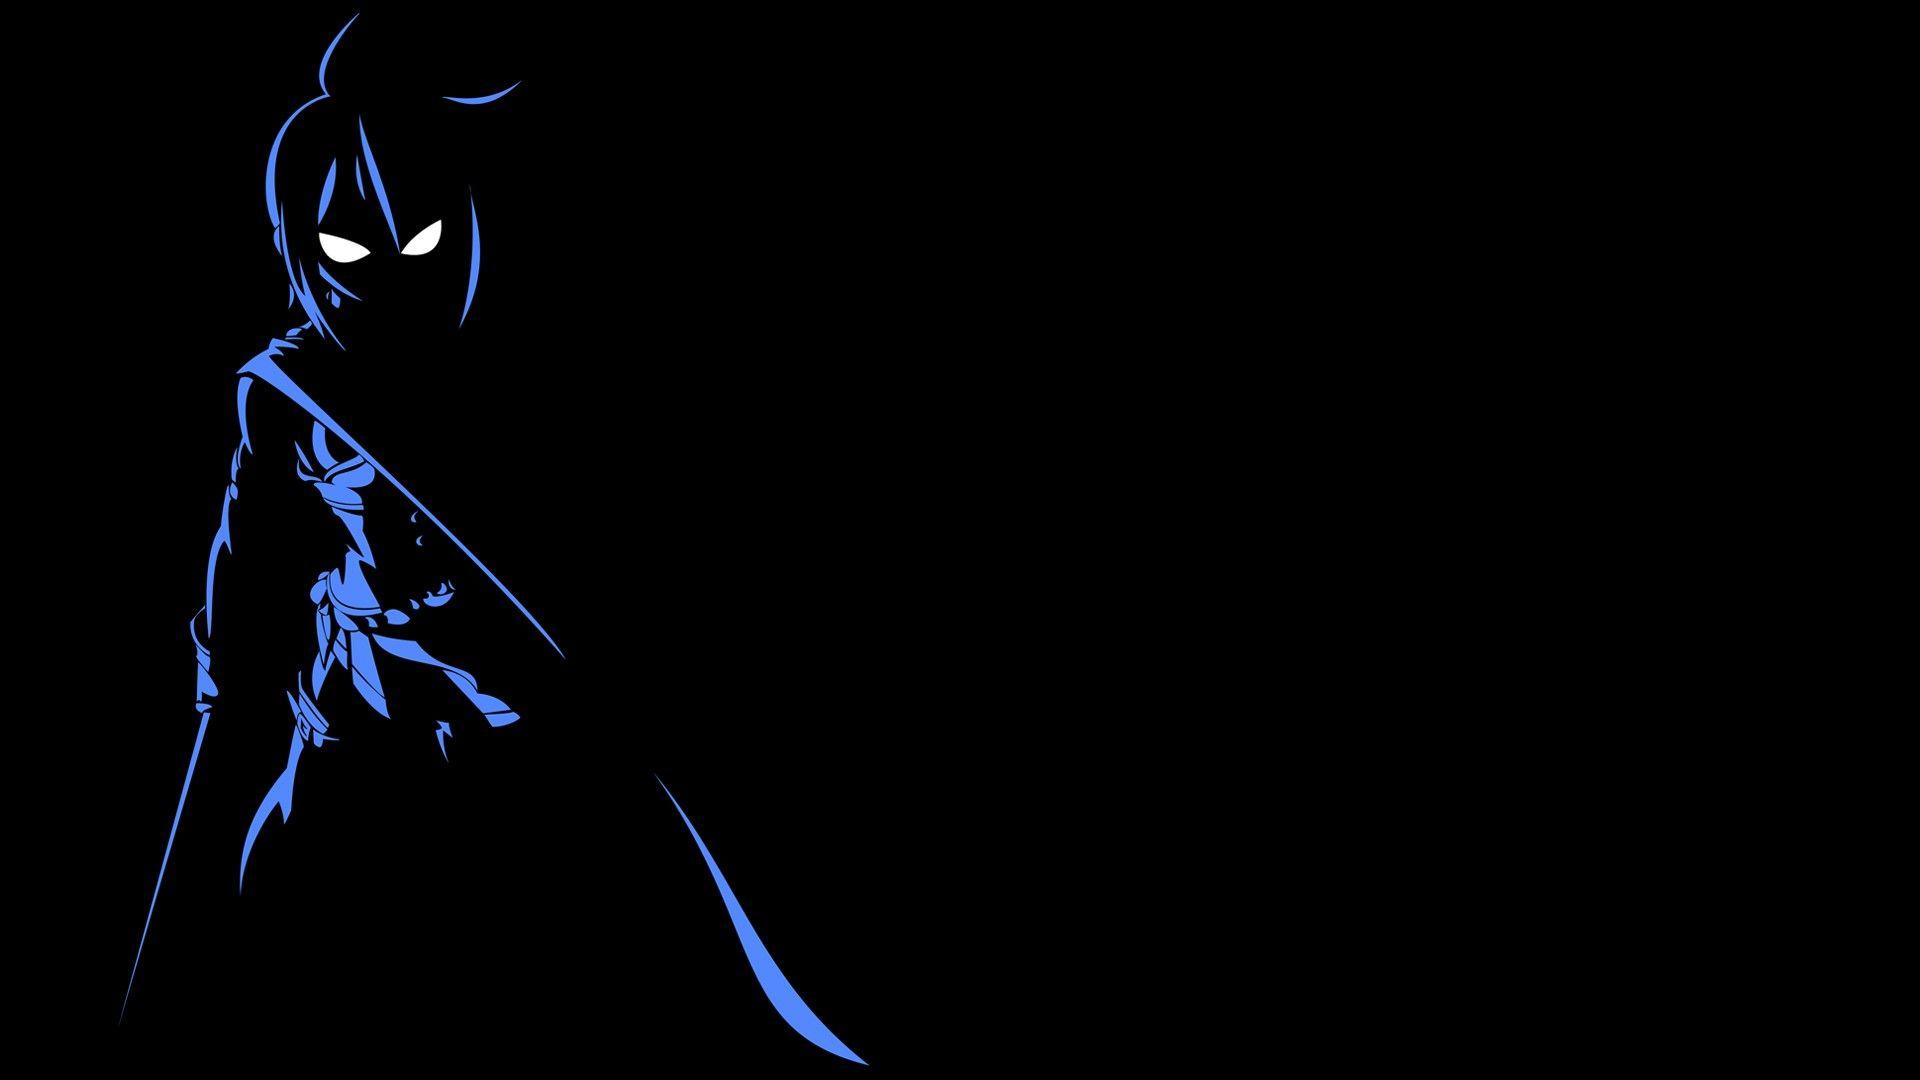 Black Anime PC Wallpapers - Wallpaper Cave